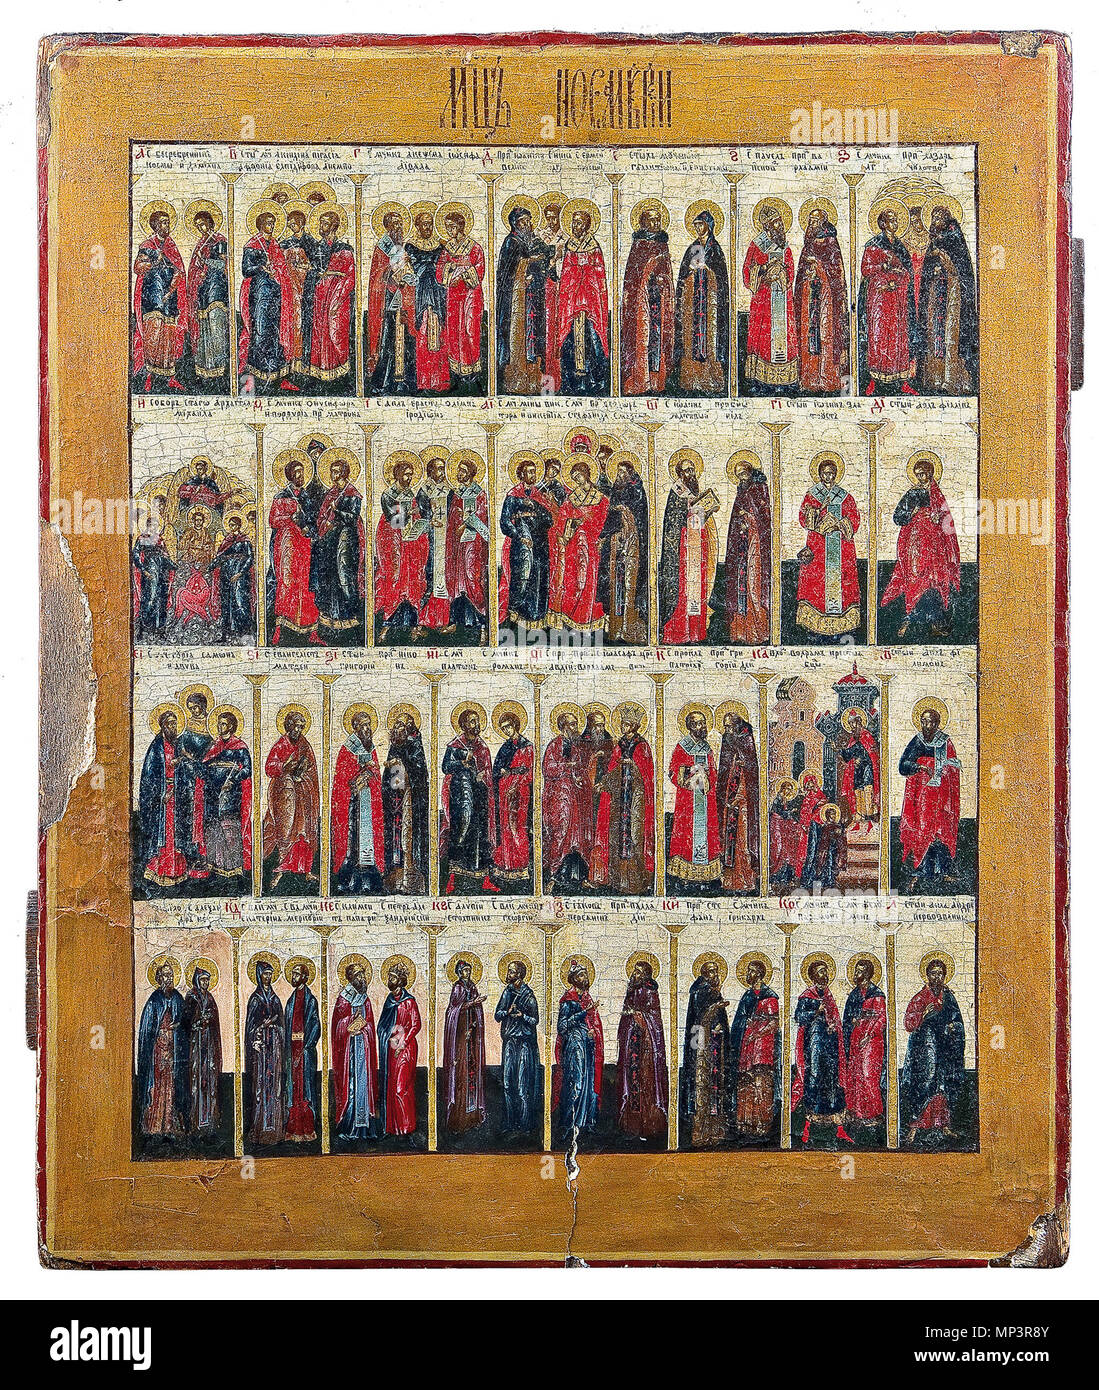 . A menological icon for the month of November. On four registers, starting from the upper left corner. Displayed are the saints and events commemorated in the Orthodox calendar during November including Kosmas and Damian. The figures shown against a cream background. Painted traditionally. The garments with predominatley with red and blue. The lower part restored. Losses. Russian, late 18th century. 39.4 x 32.5 cm. Russland, Ende 18. Jh. 18th century. Anonymous 884 Menalogical icon for November (ends 18 c., Russia. Priv. coll.) Stock Photo